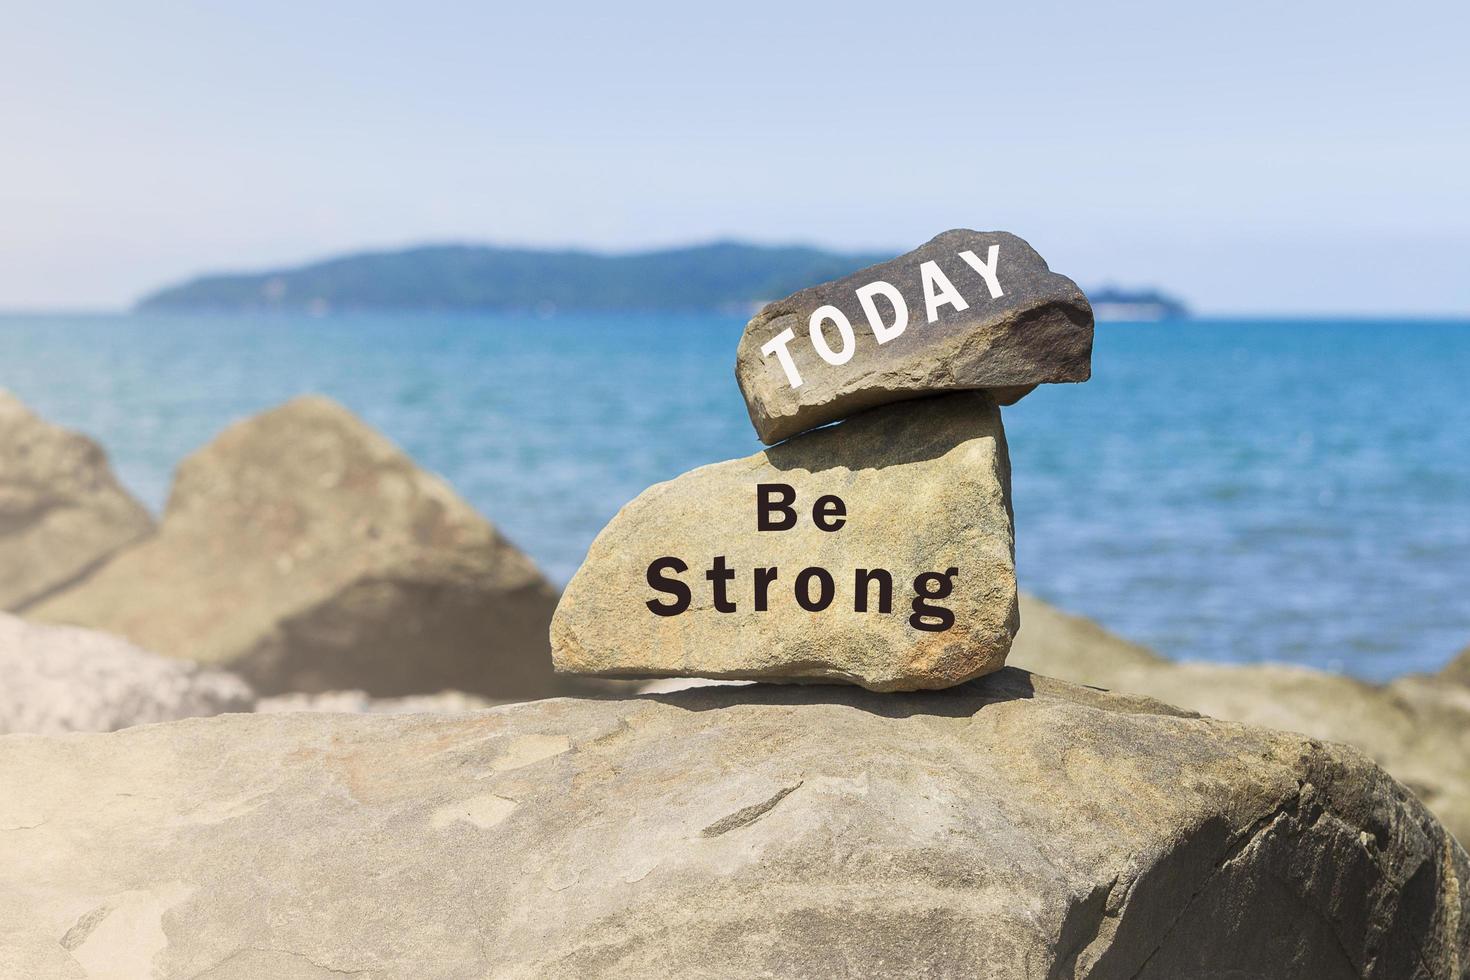 Inspirational text written on stones at the beach with sea view photo